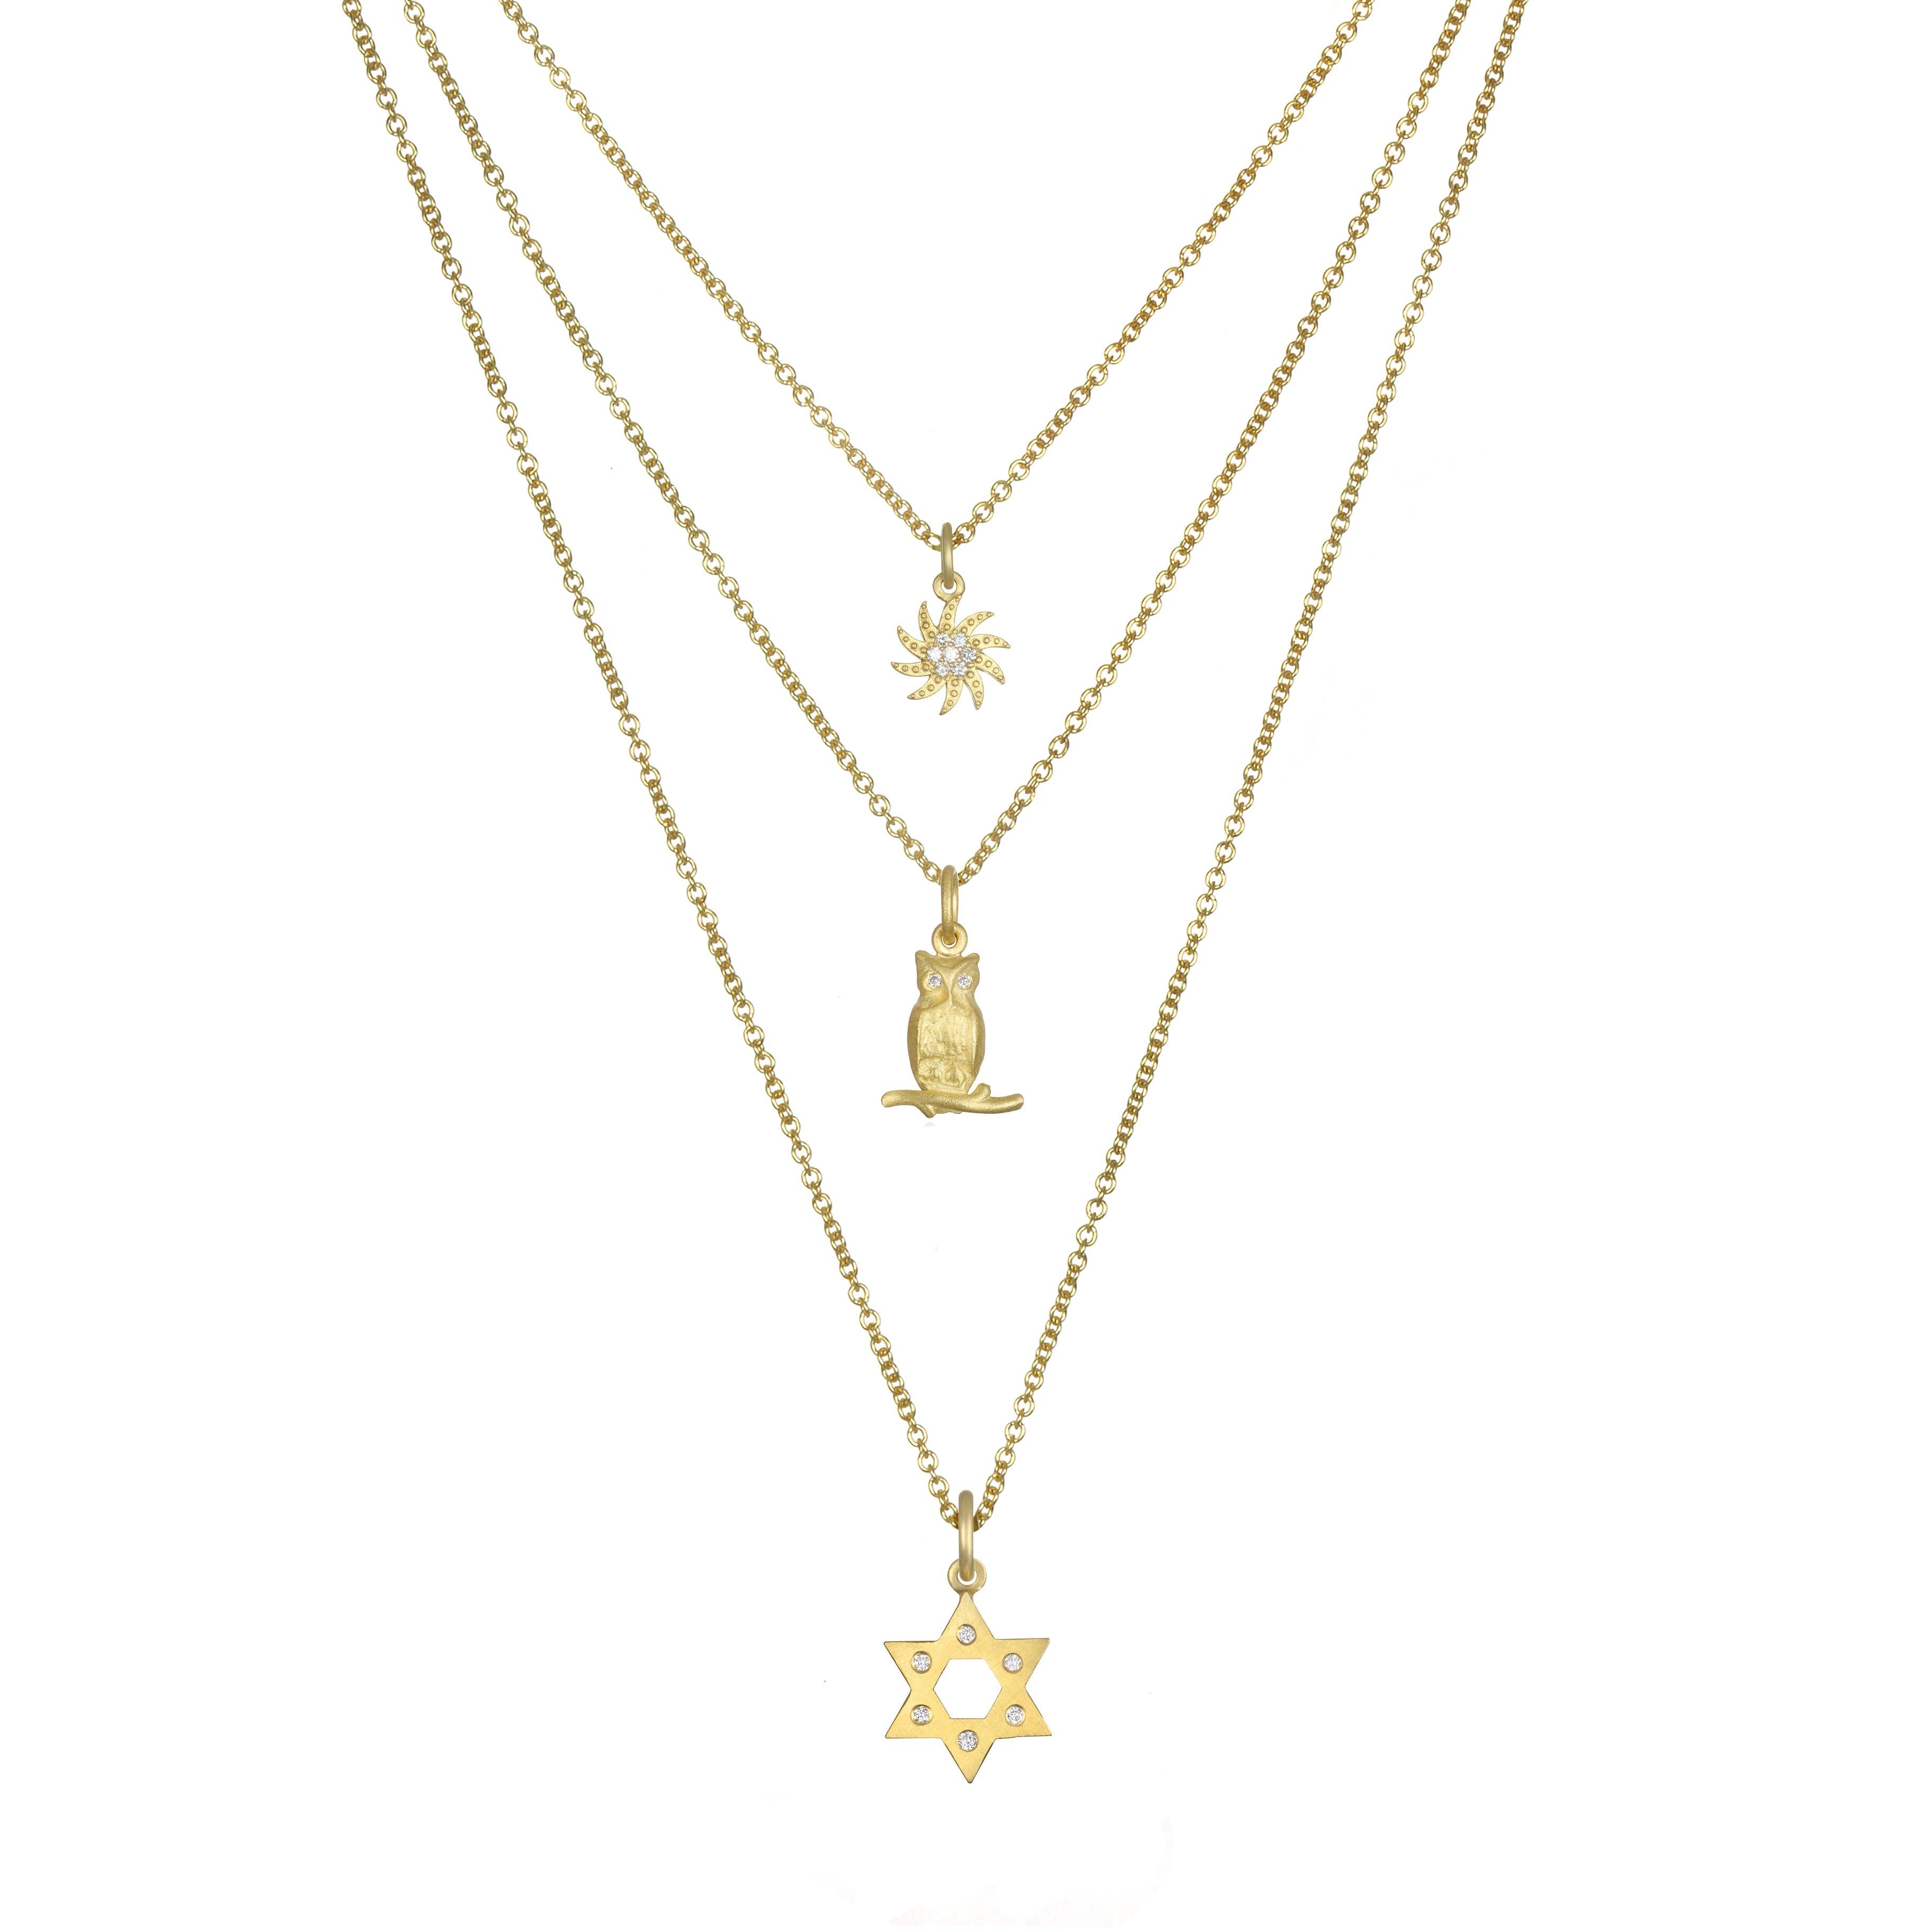 Contemporary Faye Kim 18 Karat Gold and Diamond Star of David Charm Necklace For Sale